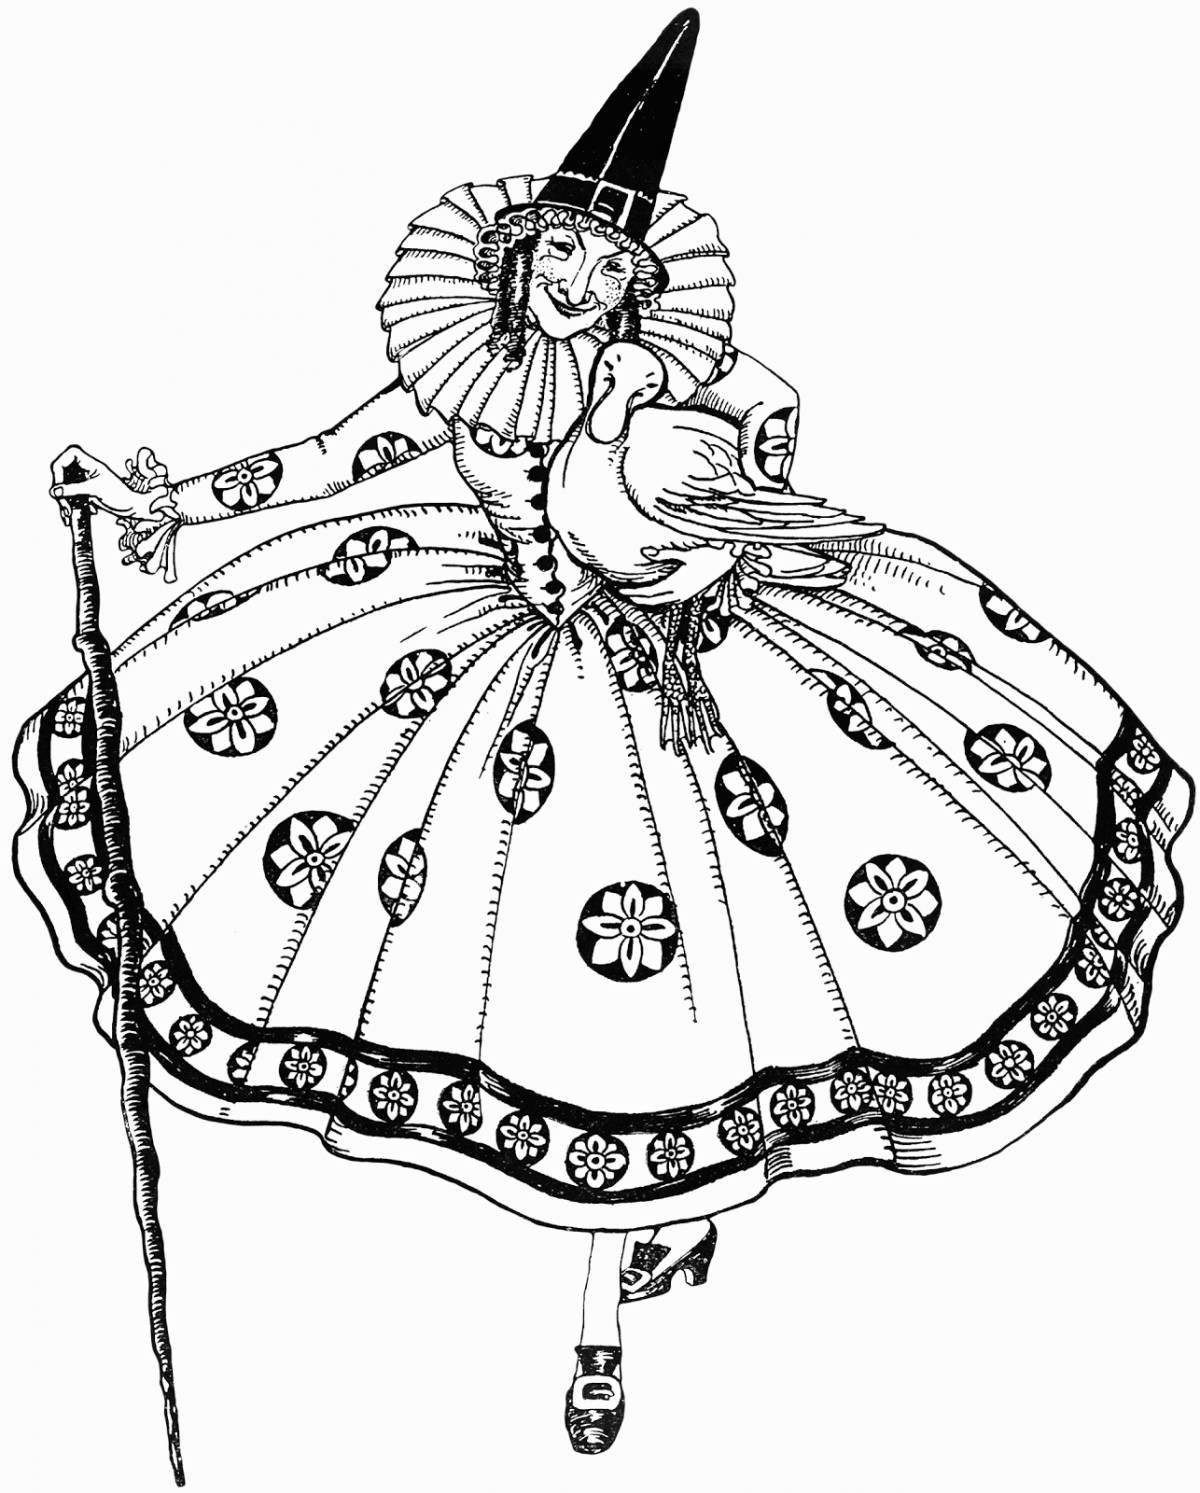 Coloring page luxury carnival costume